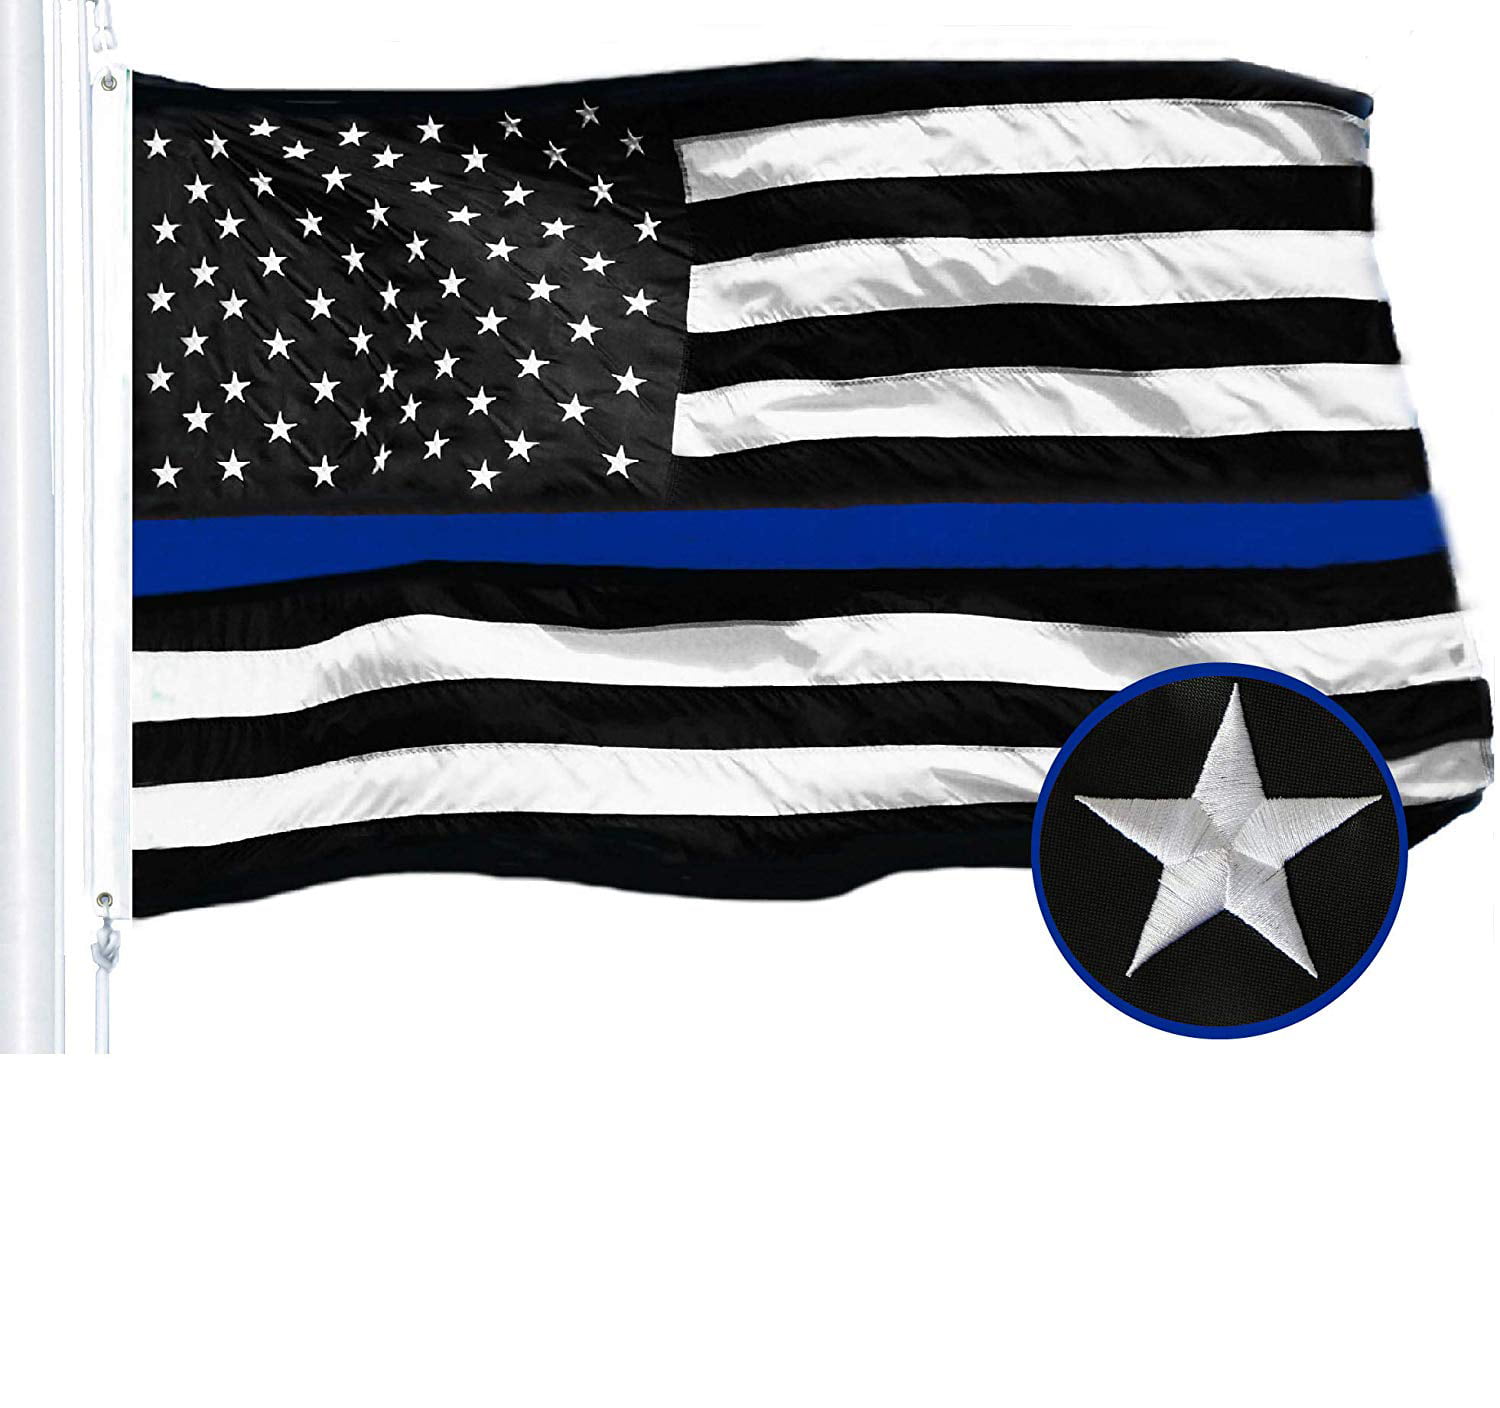 Qaxlry Police-Flags 3x5 Outdoor,Thin Blue Line American Flag Honoring USA Law Enforcement Officers Black and White Stripes 